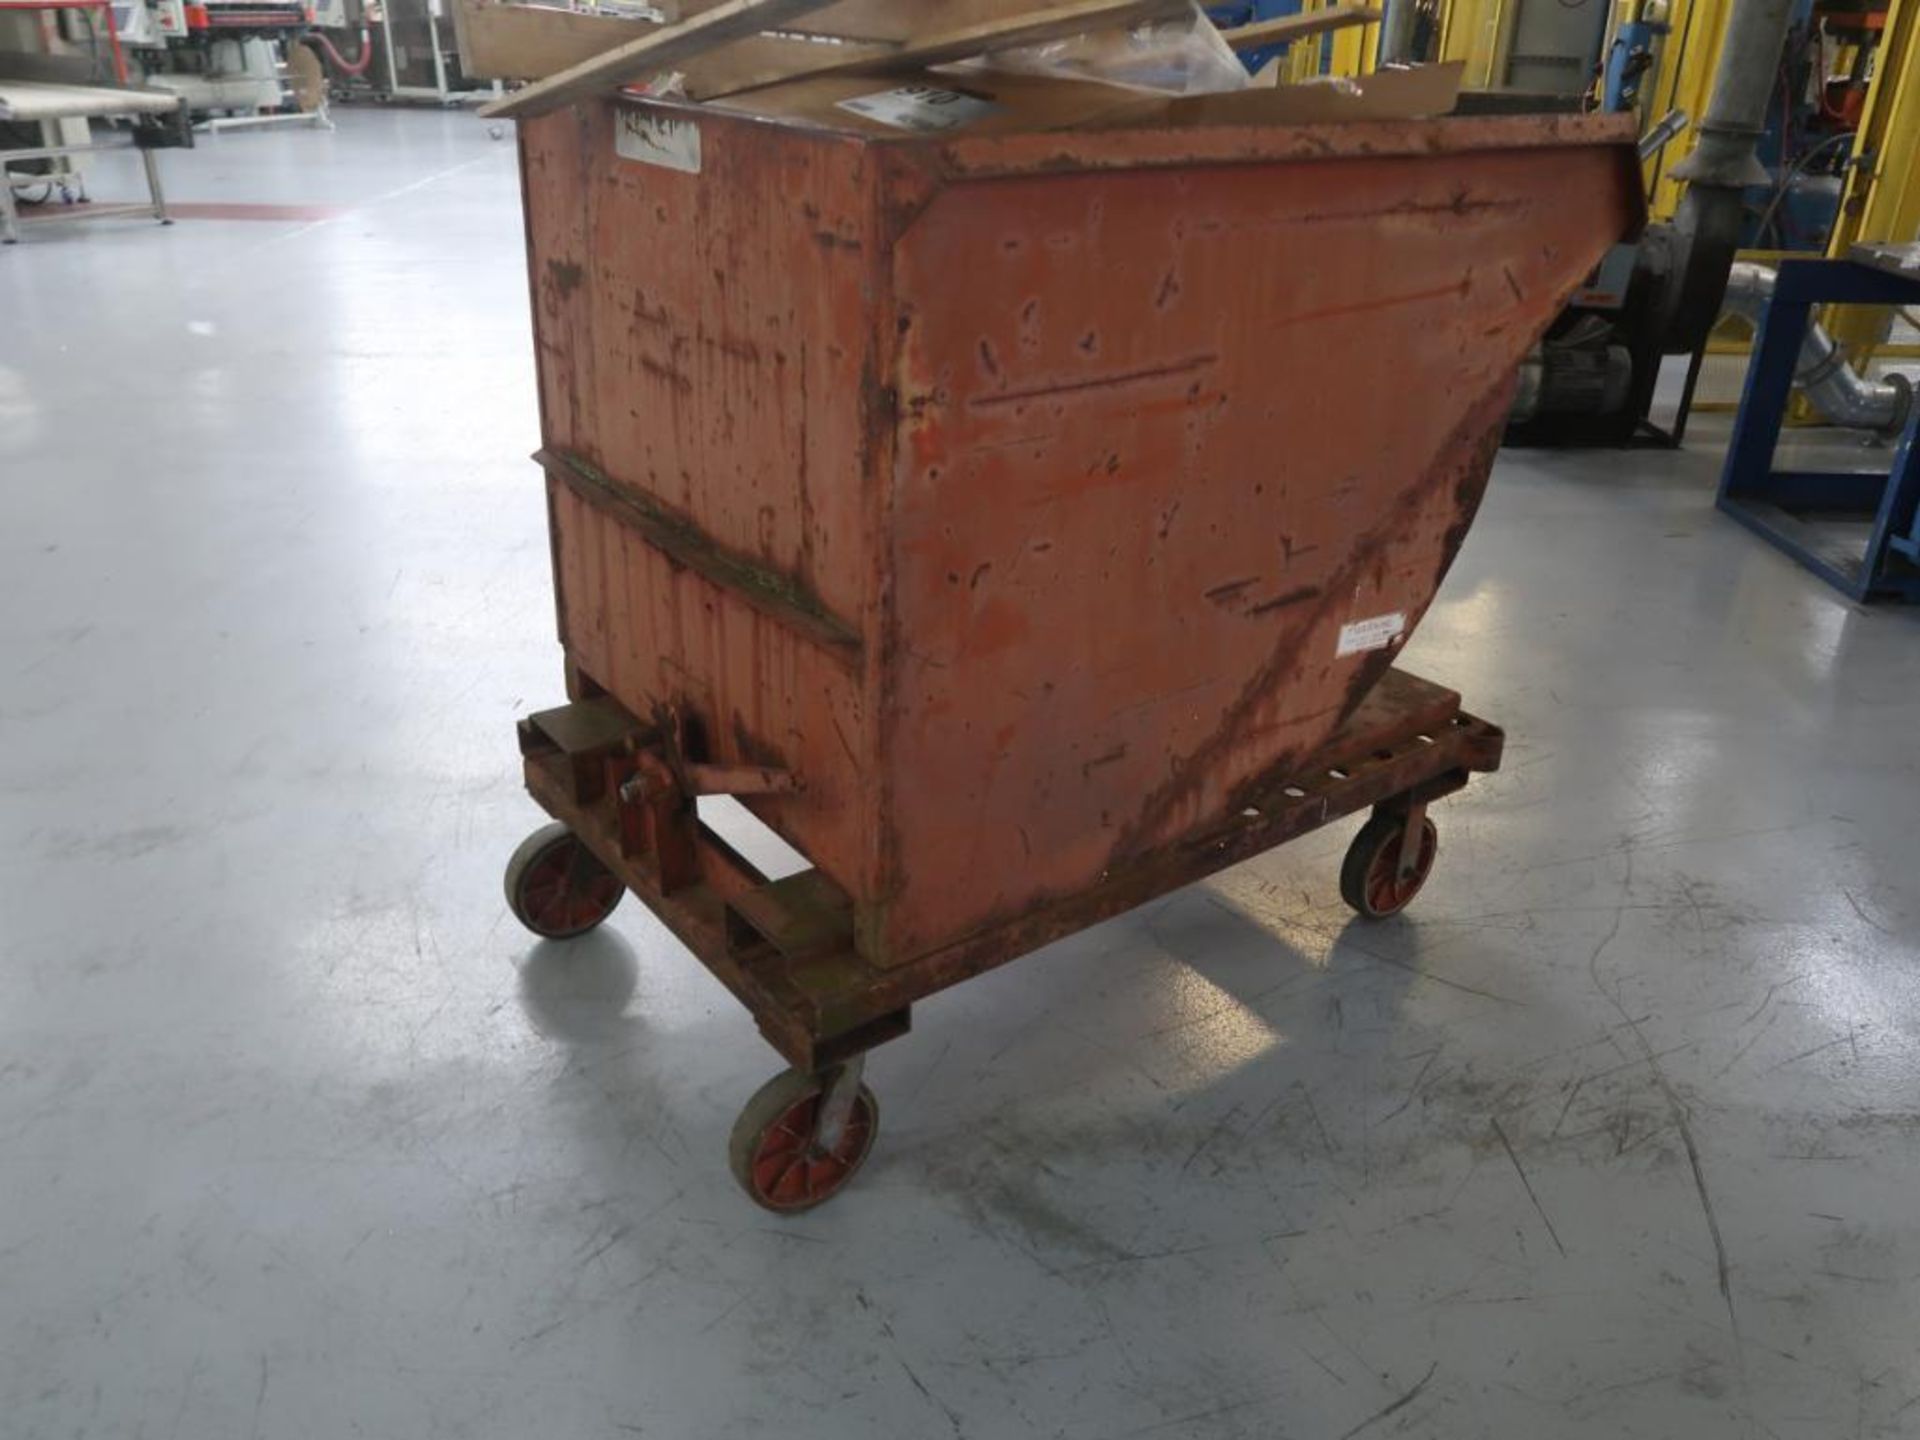 1-Yd. Self Dumping Hopper (LOCATION: 39 PEARCE INDUSTRIAL RD., SHELBYVILLE, KY 40065)